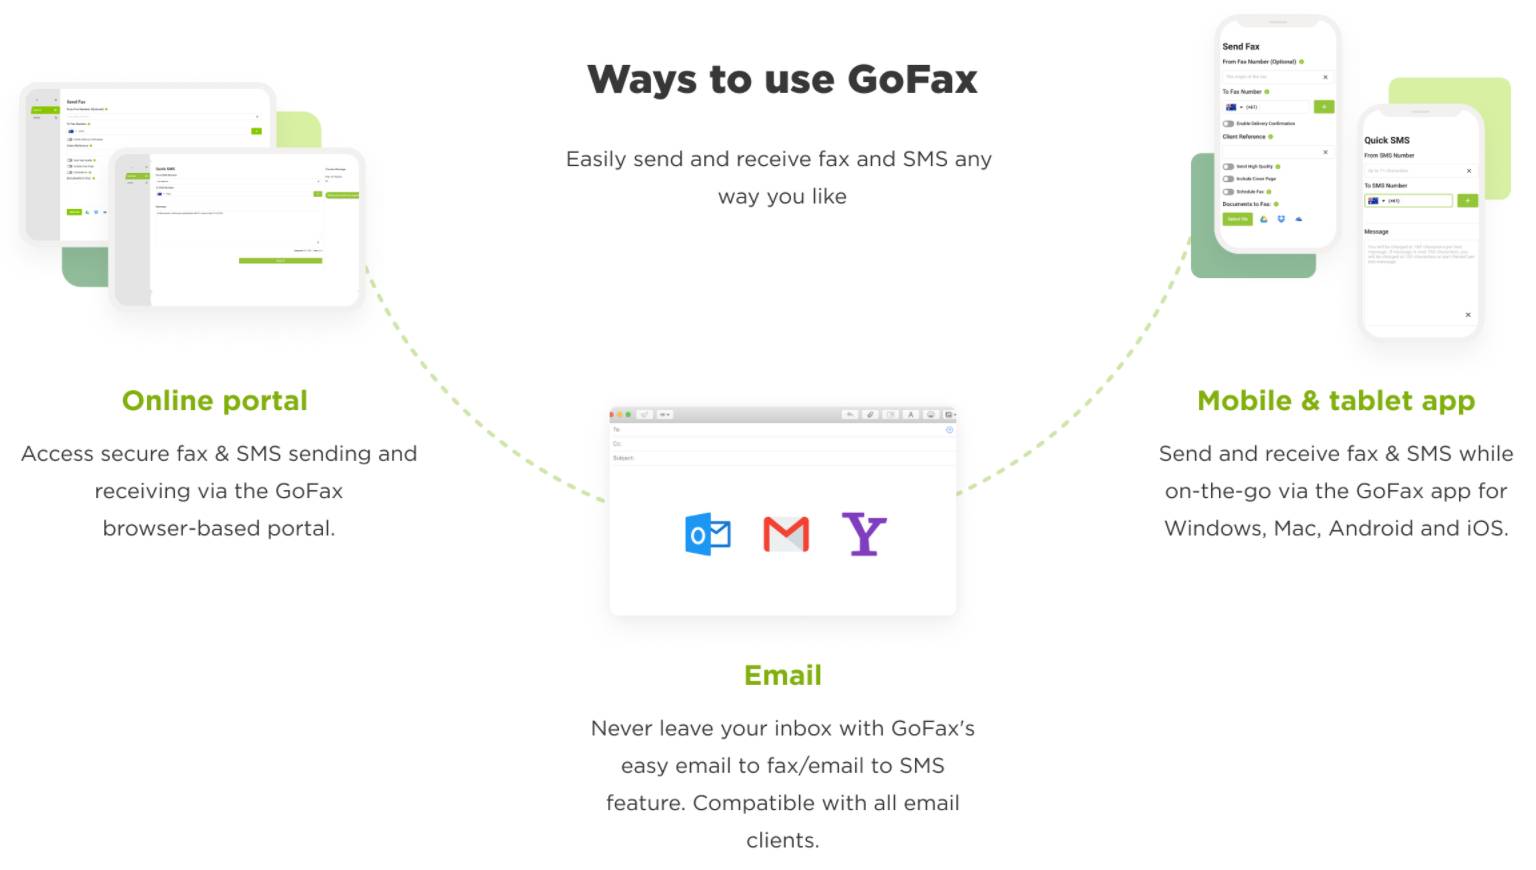 Why to use gofax